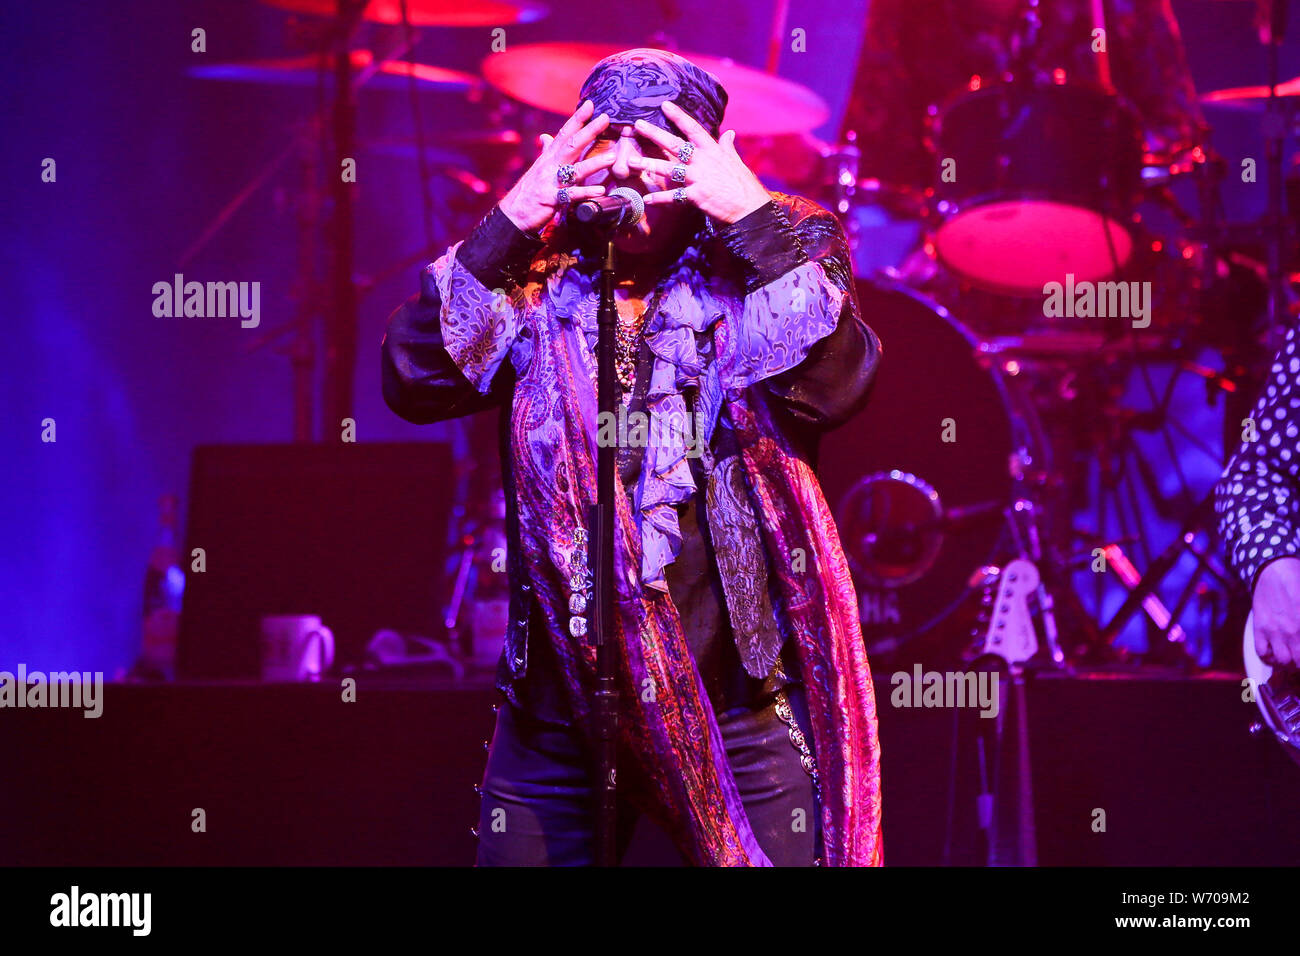 HUNTINGTON, NY-JUL 18: Stevie Van Zandt of Little Steven & the Disciples of Soul in concert on July 18, 2019 at the Paramount in Huntington, New York. Stock Photo